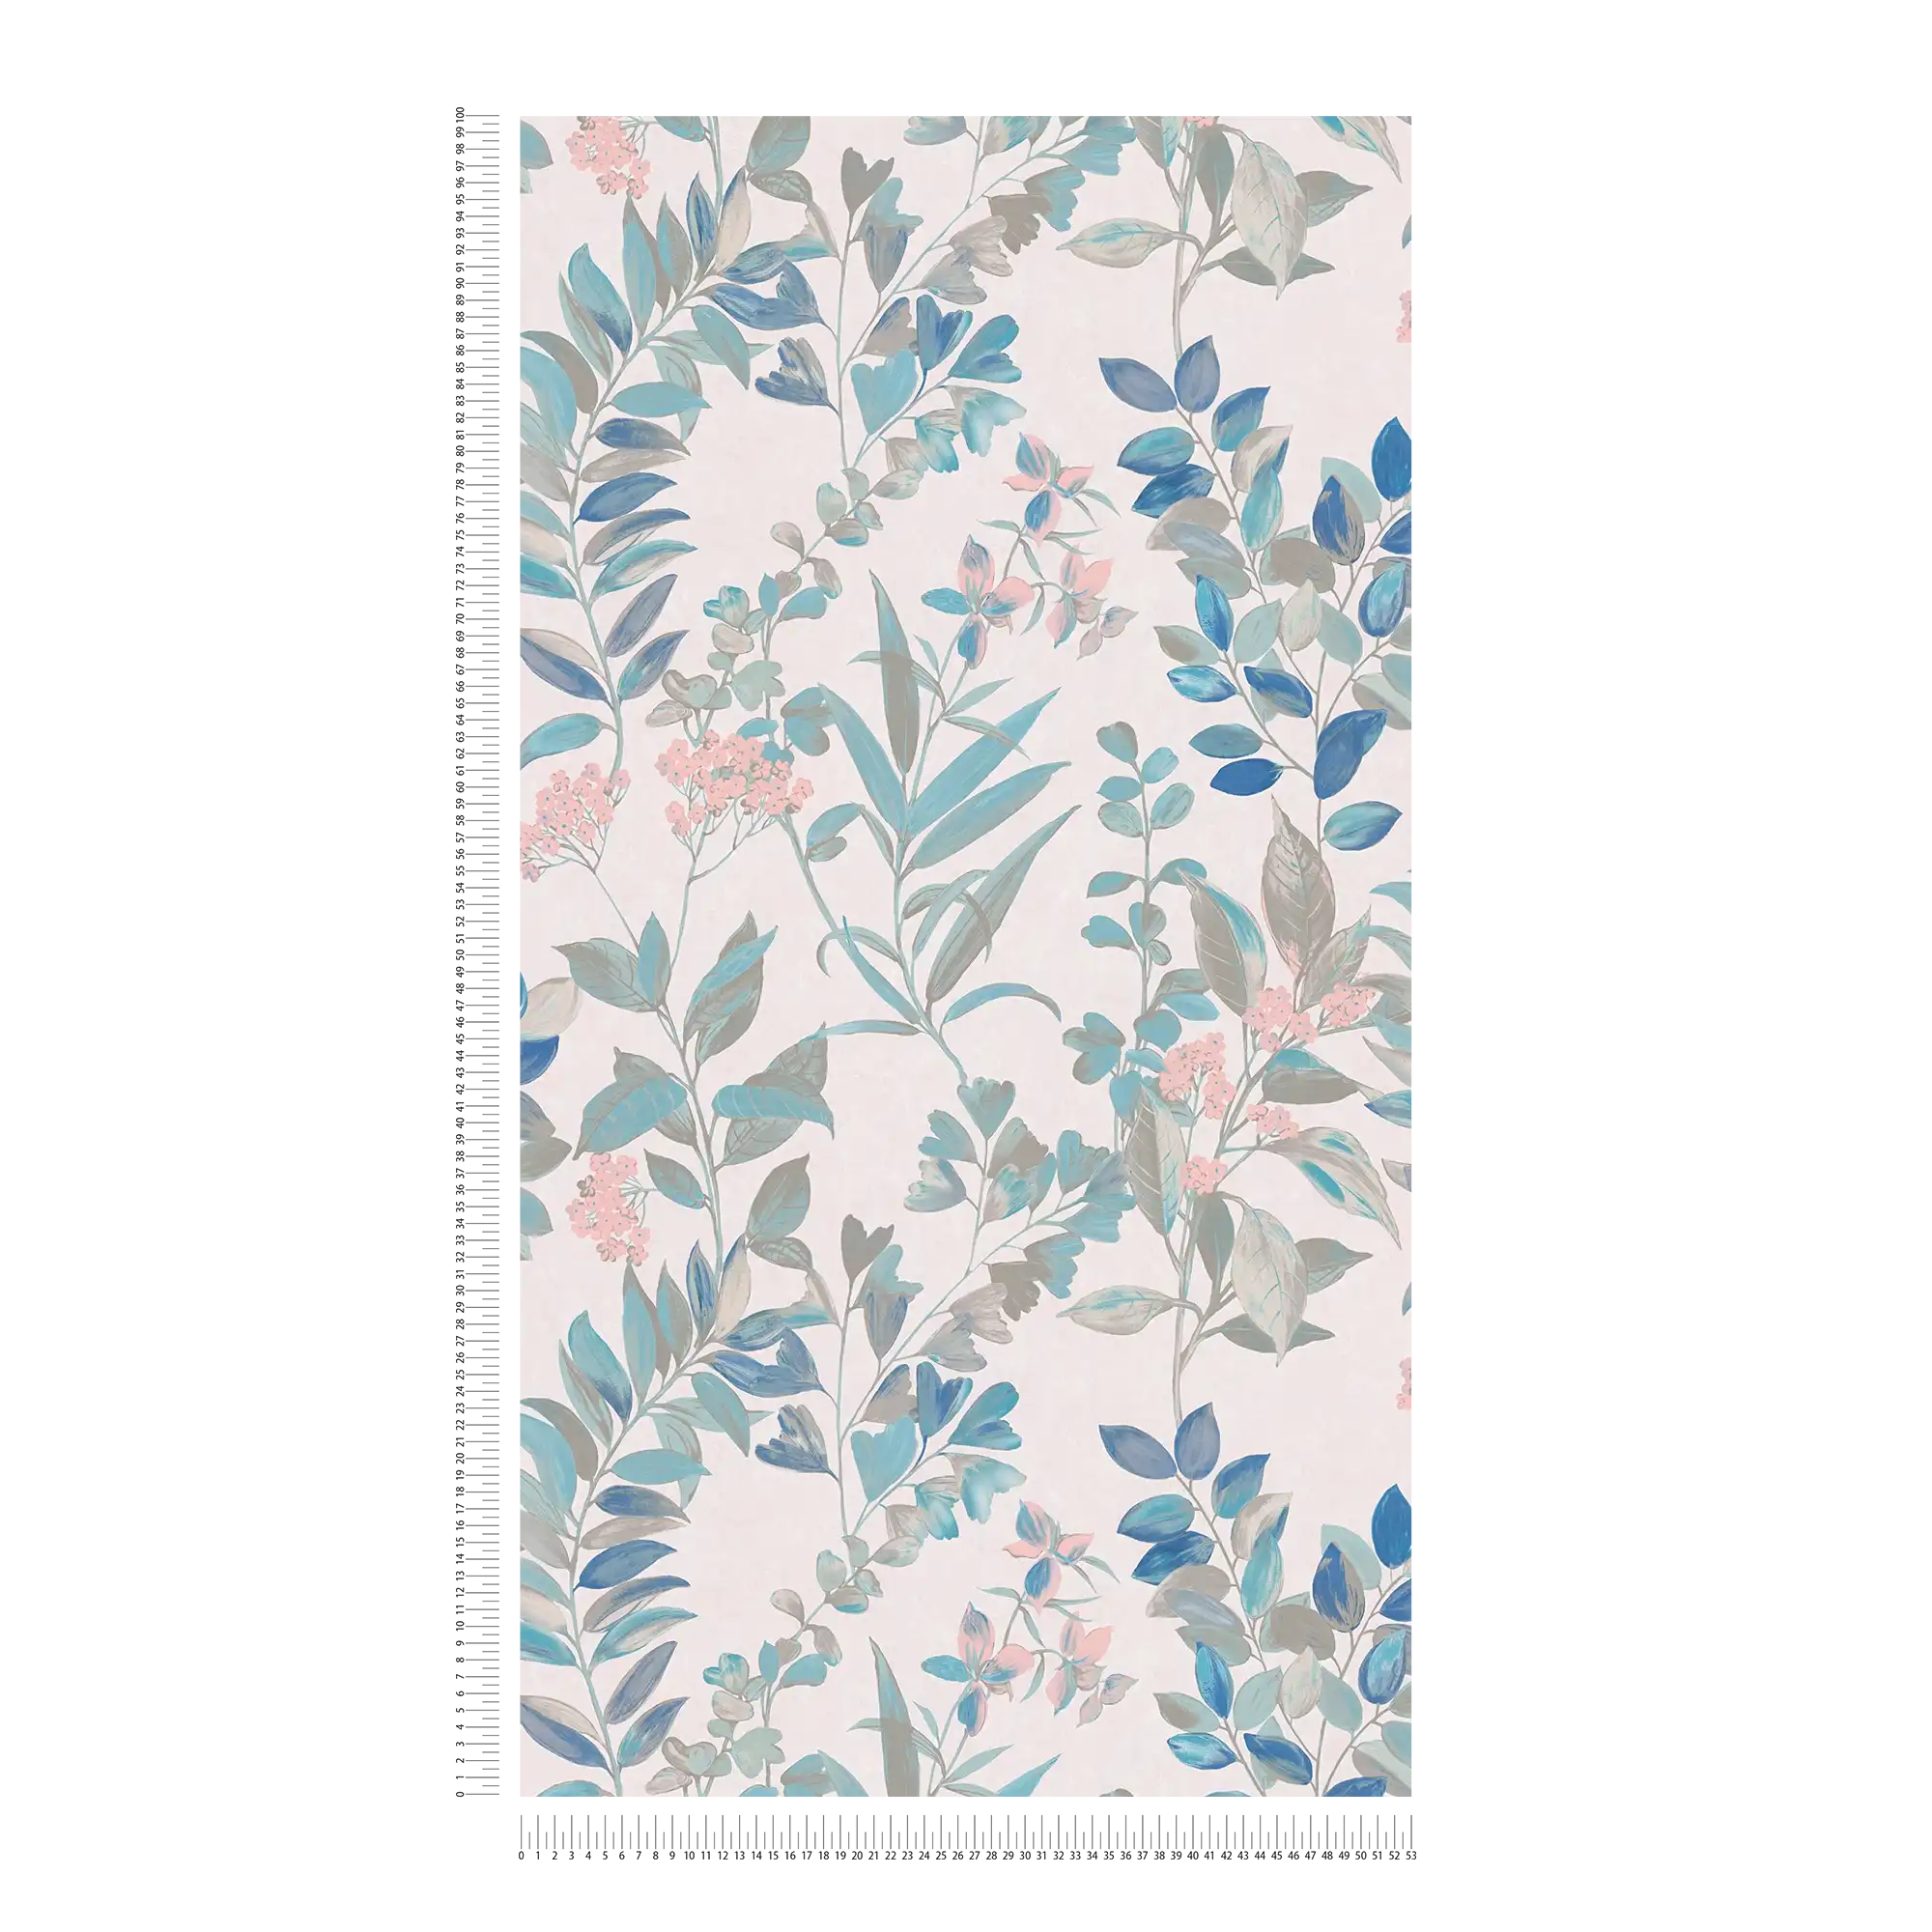             Floral wallpaper with floral pattern - multicoloured, white, turquoise
        